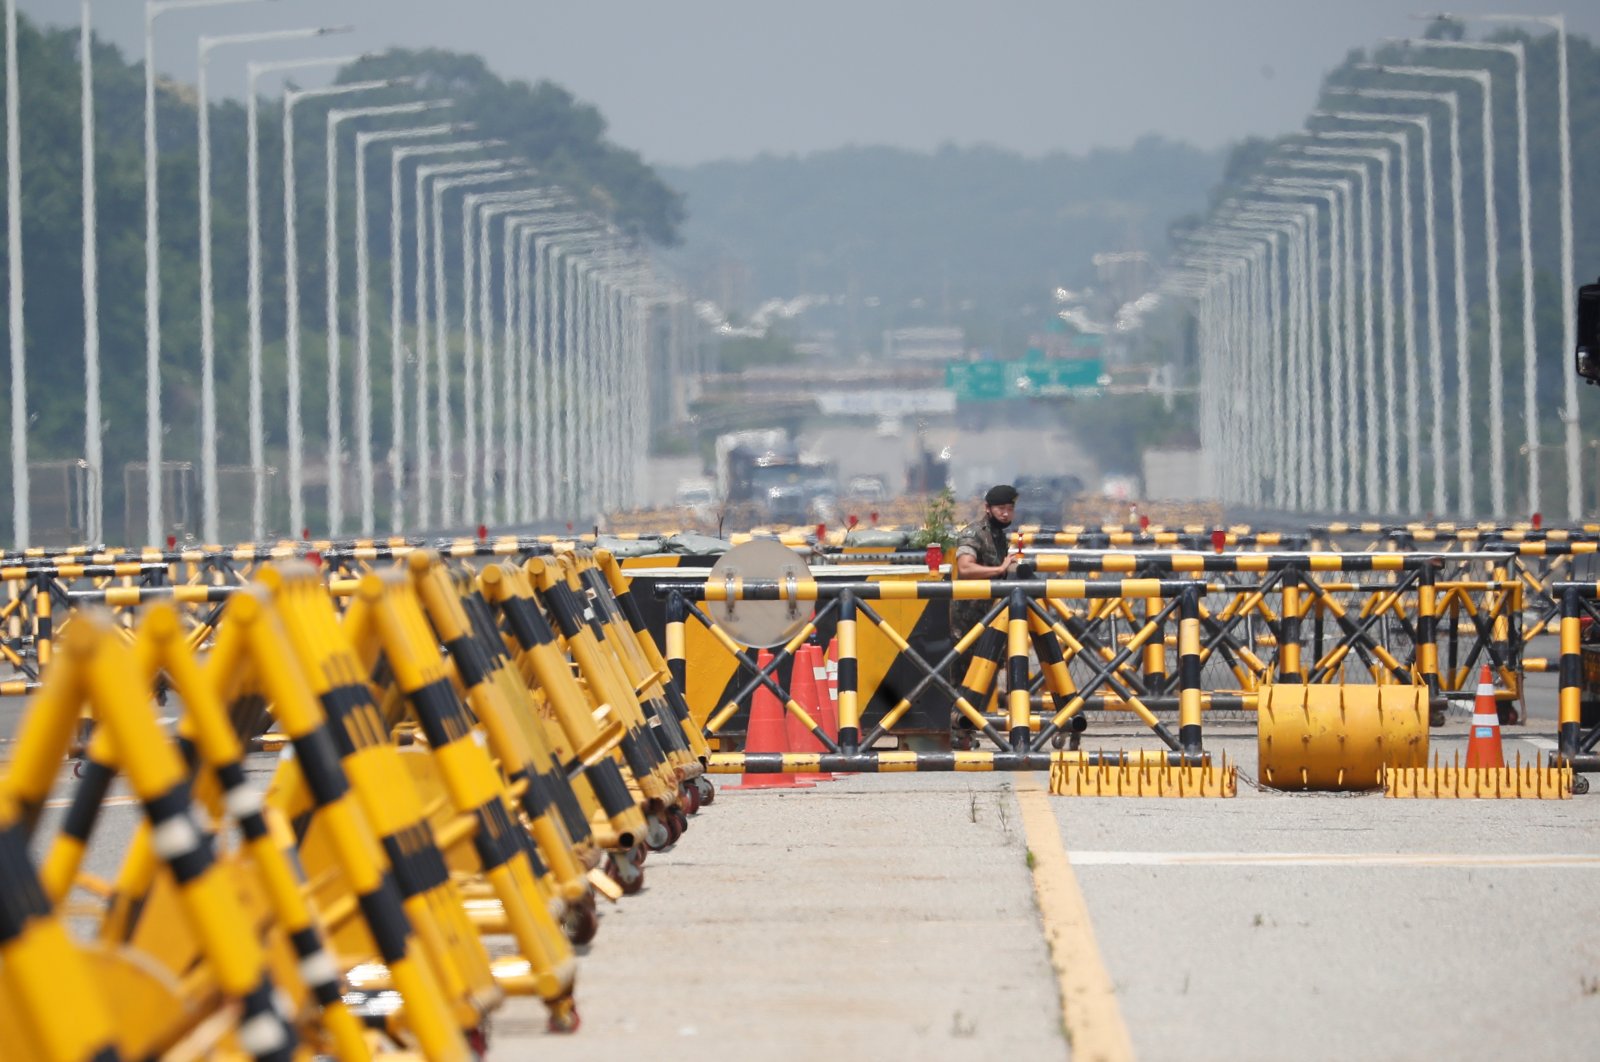 A soldier stands guard at a checkpoint on the Grand Unification Bridge, which leads to the inter-Korean Kaesong Industrial Complex in North Korea, just south of the demilitarized zone separating the two Koreas, in Paju, South Korea, June 17, 2020. (Reuters File Photo)